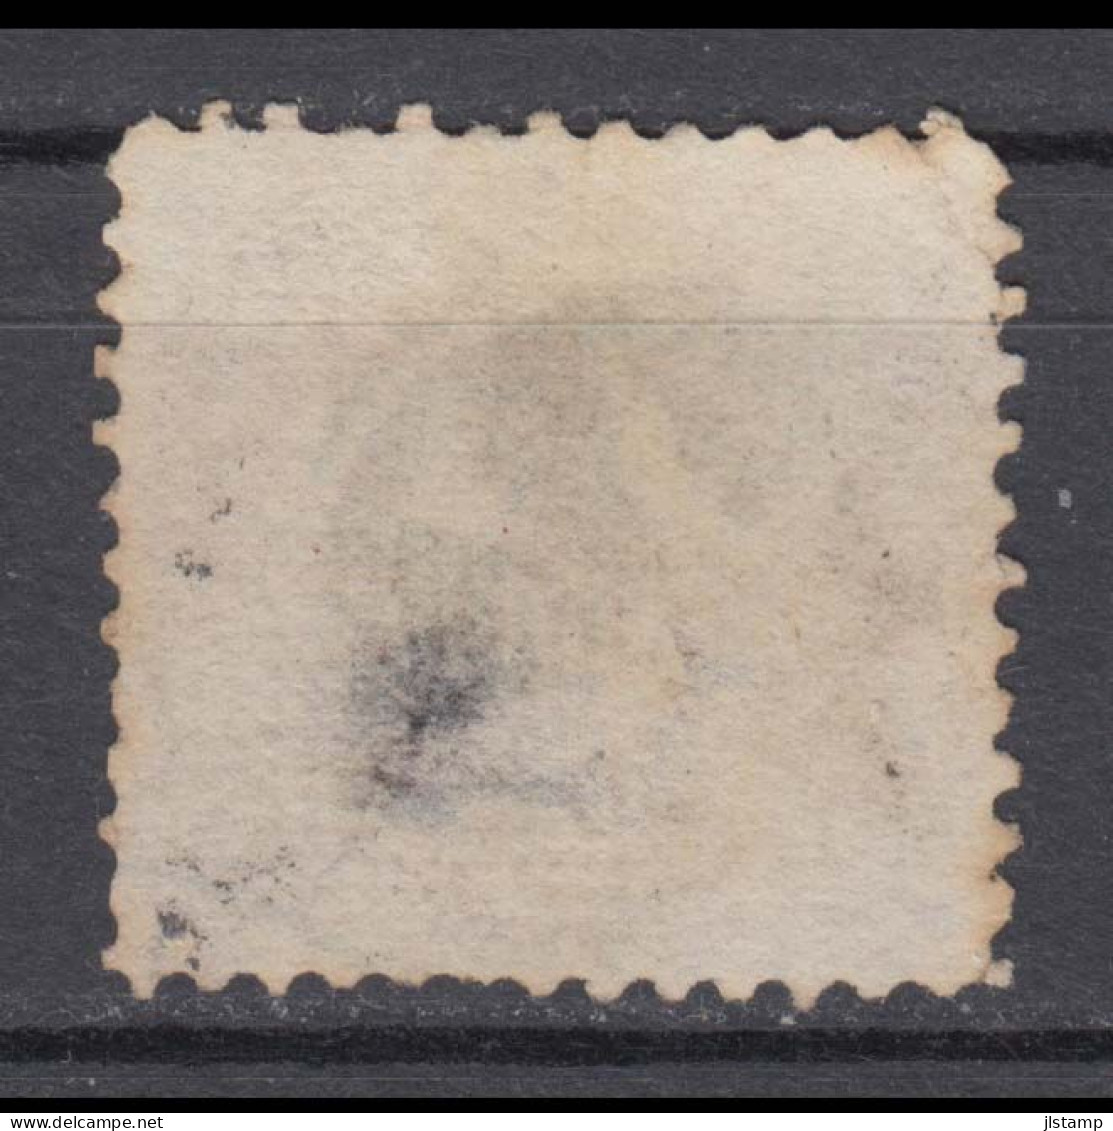 US 1869 Post Horse And Rider 2c,Grill,fine Used Stamp ,Scott#113,VF, $85 - Oblitérés